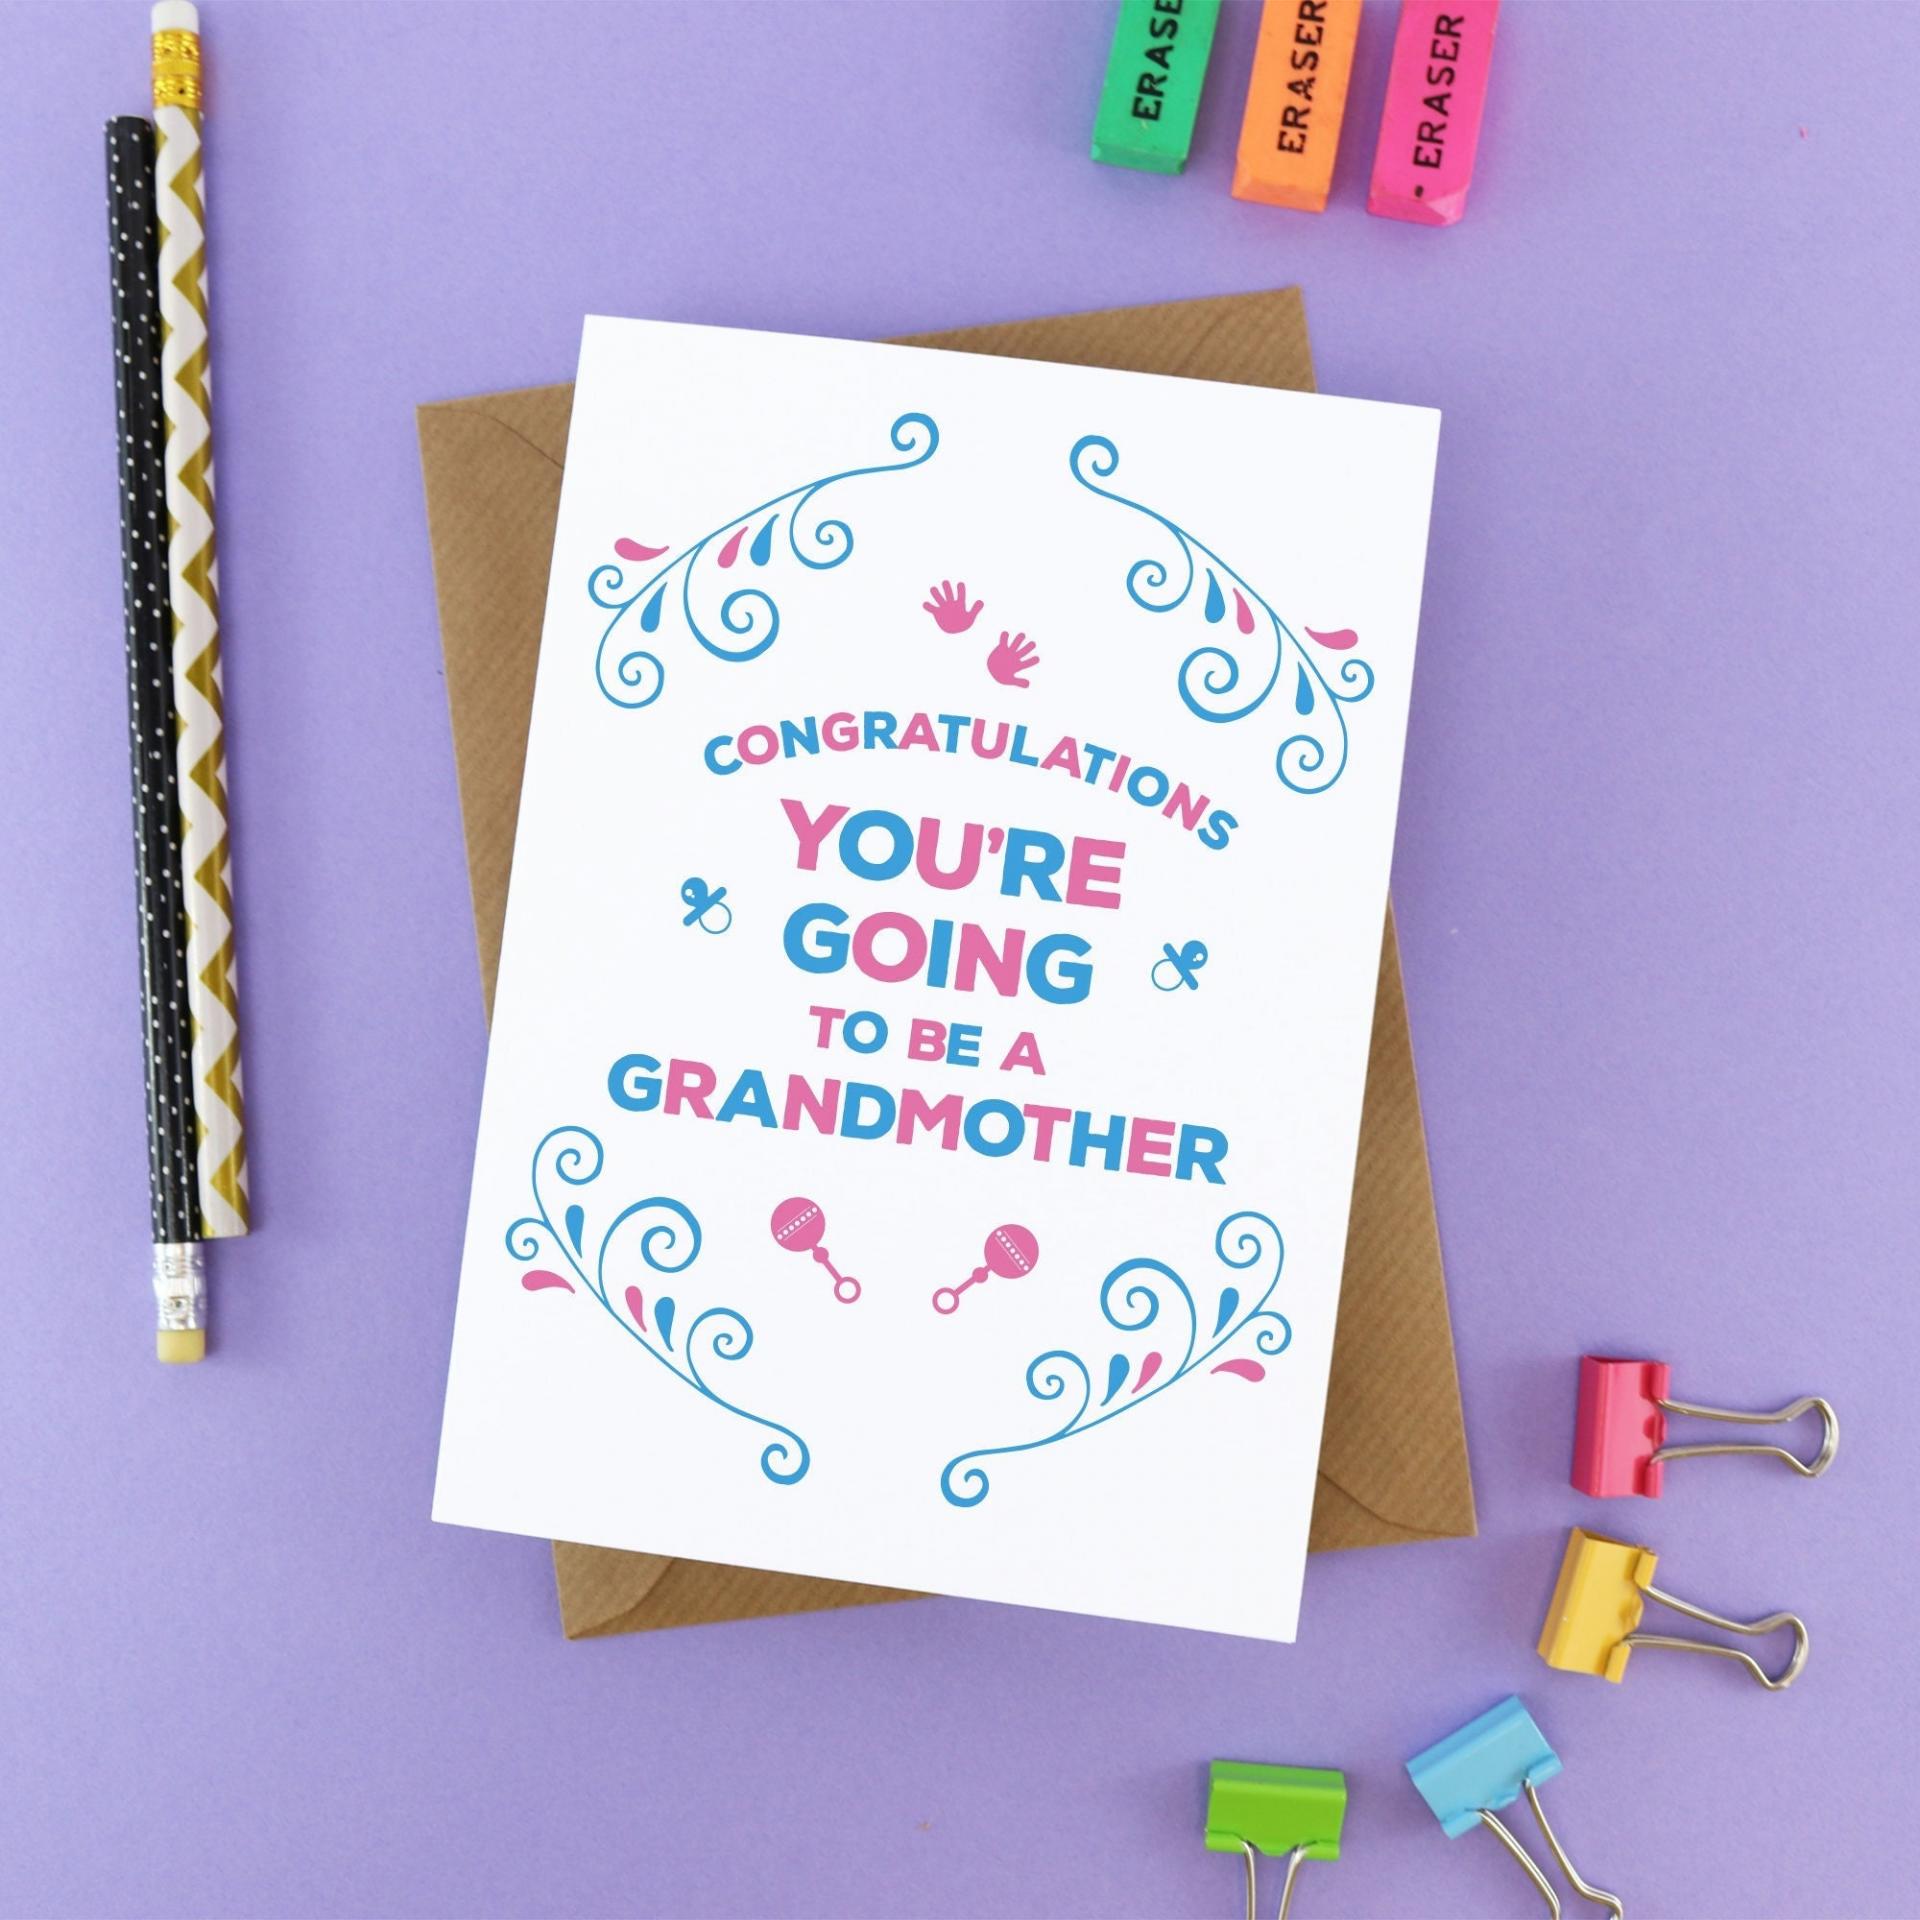 You're going to be a Grandmother Card - Nan Grandma Card, Expecting Card, New Baby Card, Pregnancy Announce, Pregnancy Reveal, Pregnancy